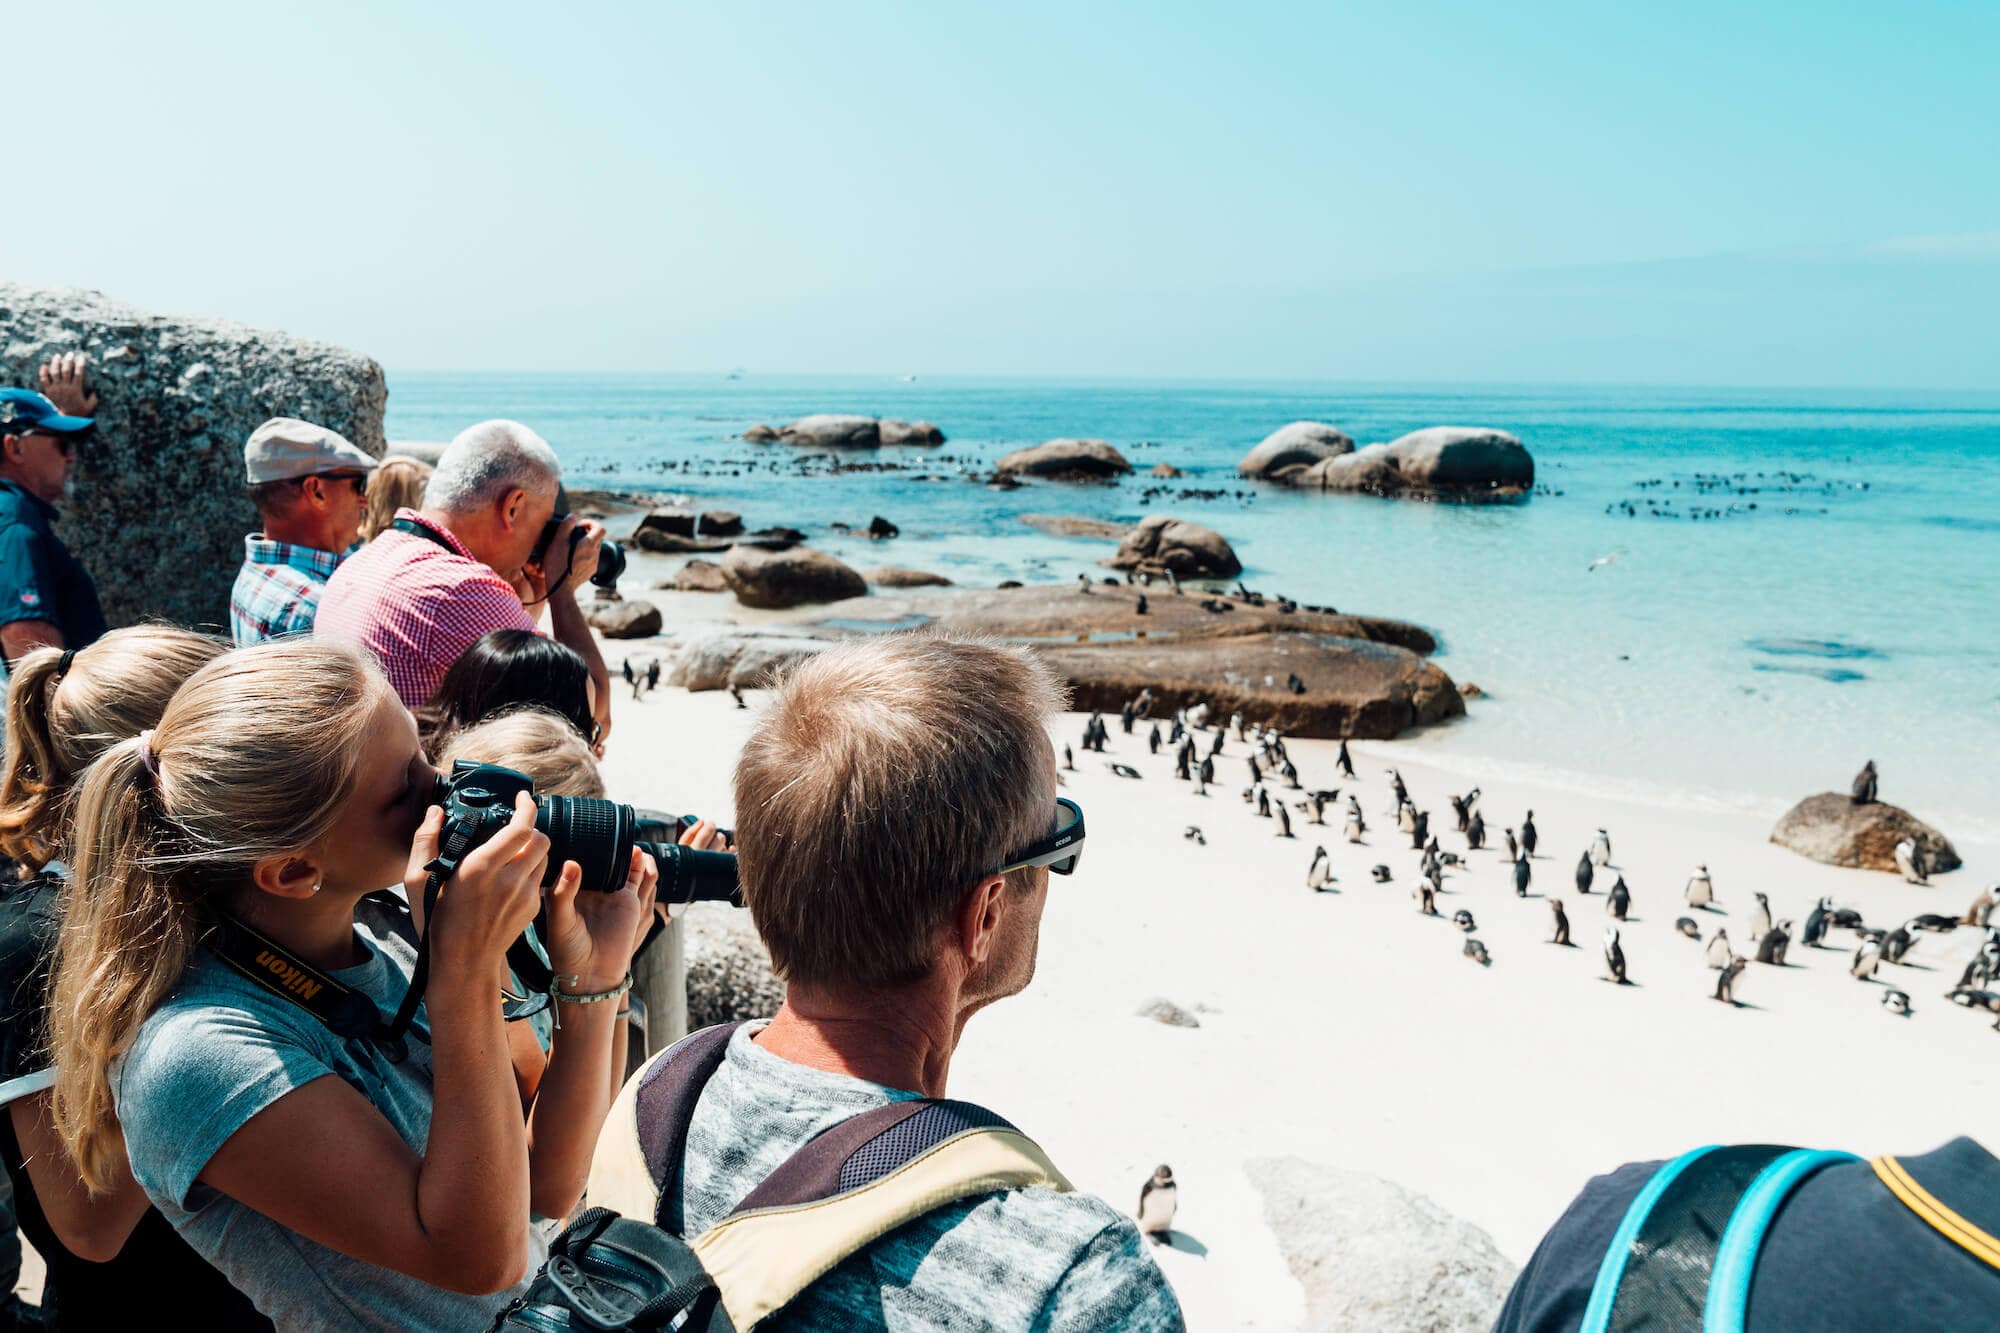 A group of people holding cameras stand looking toward a rocky, white sand beach teeming with penguins. Turquoise ocean water stretches to the horizon in the background.